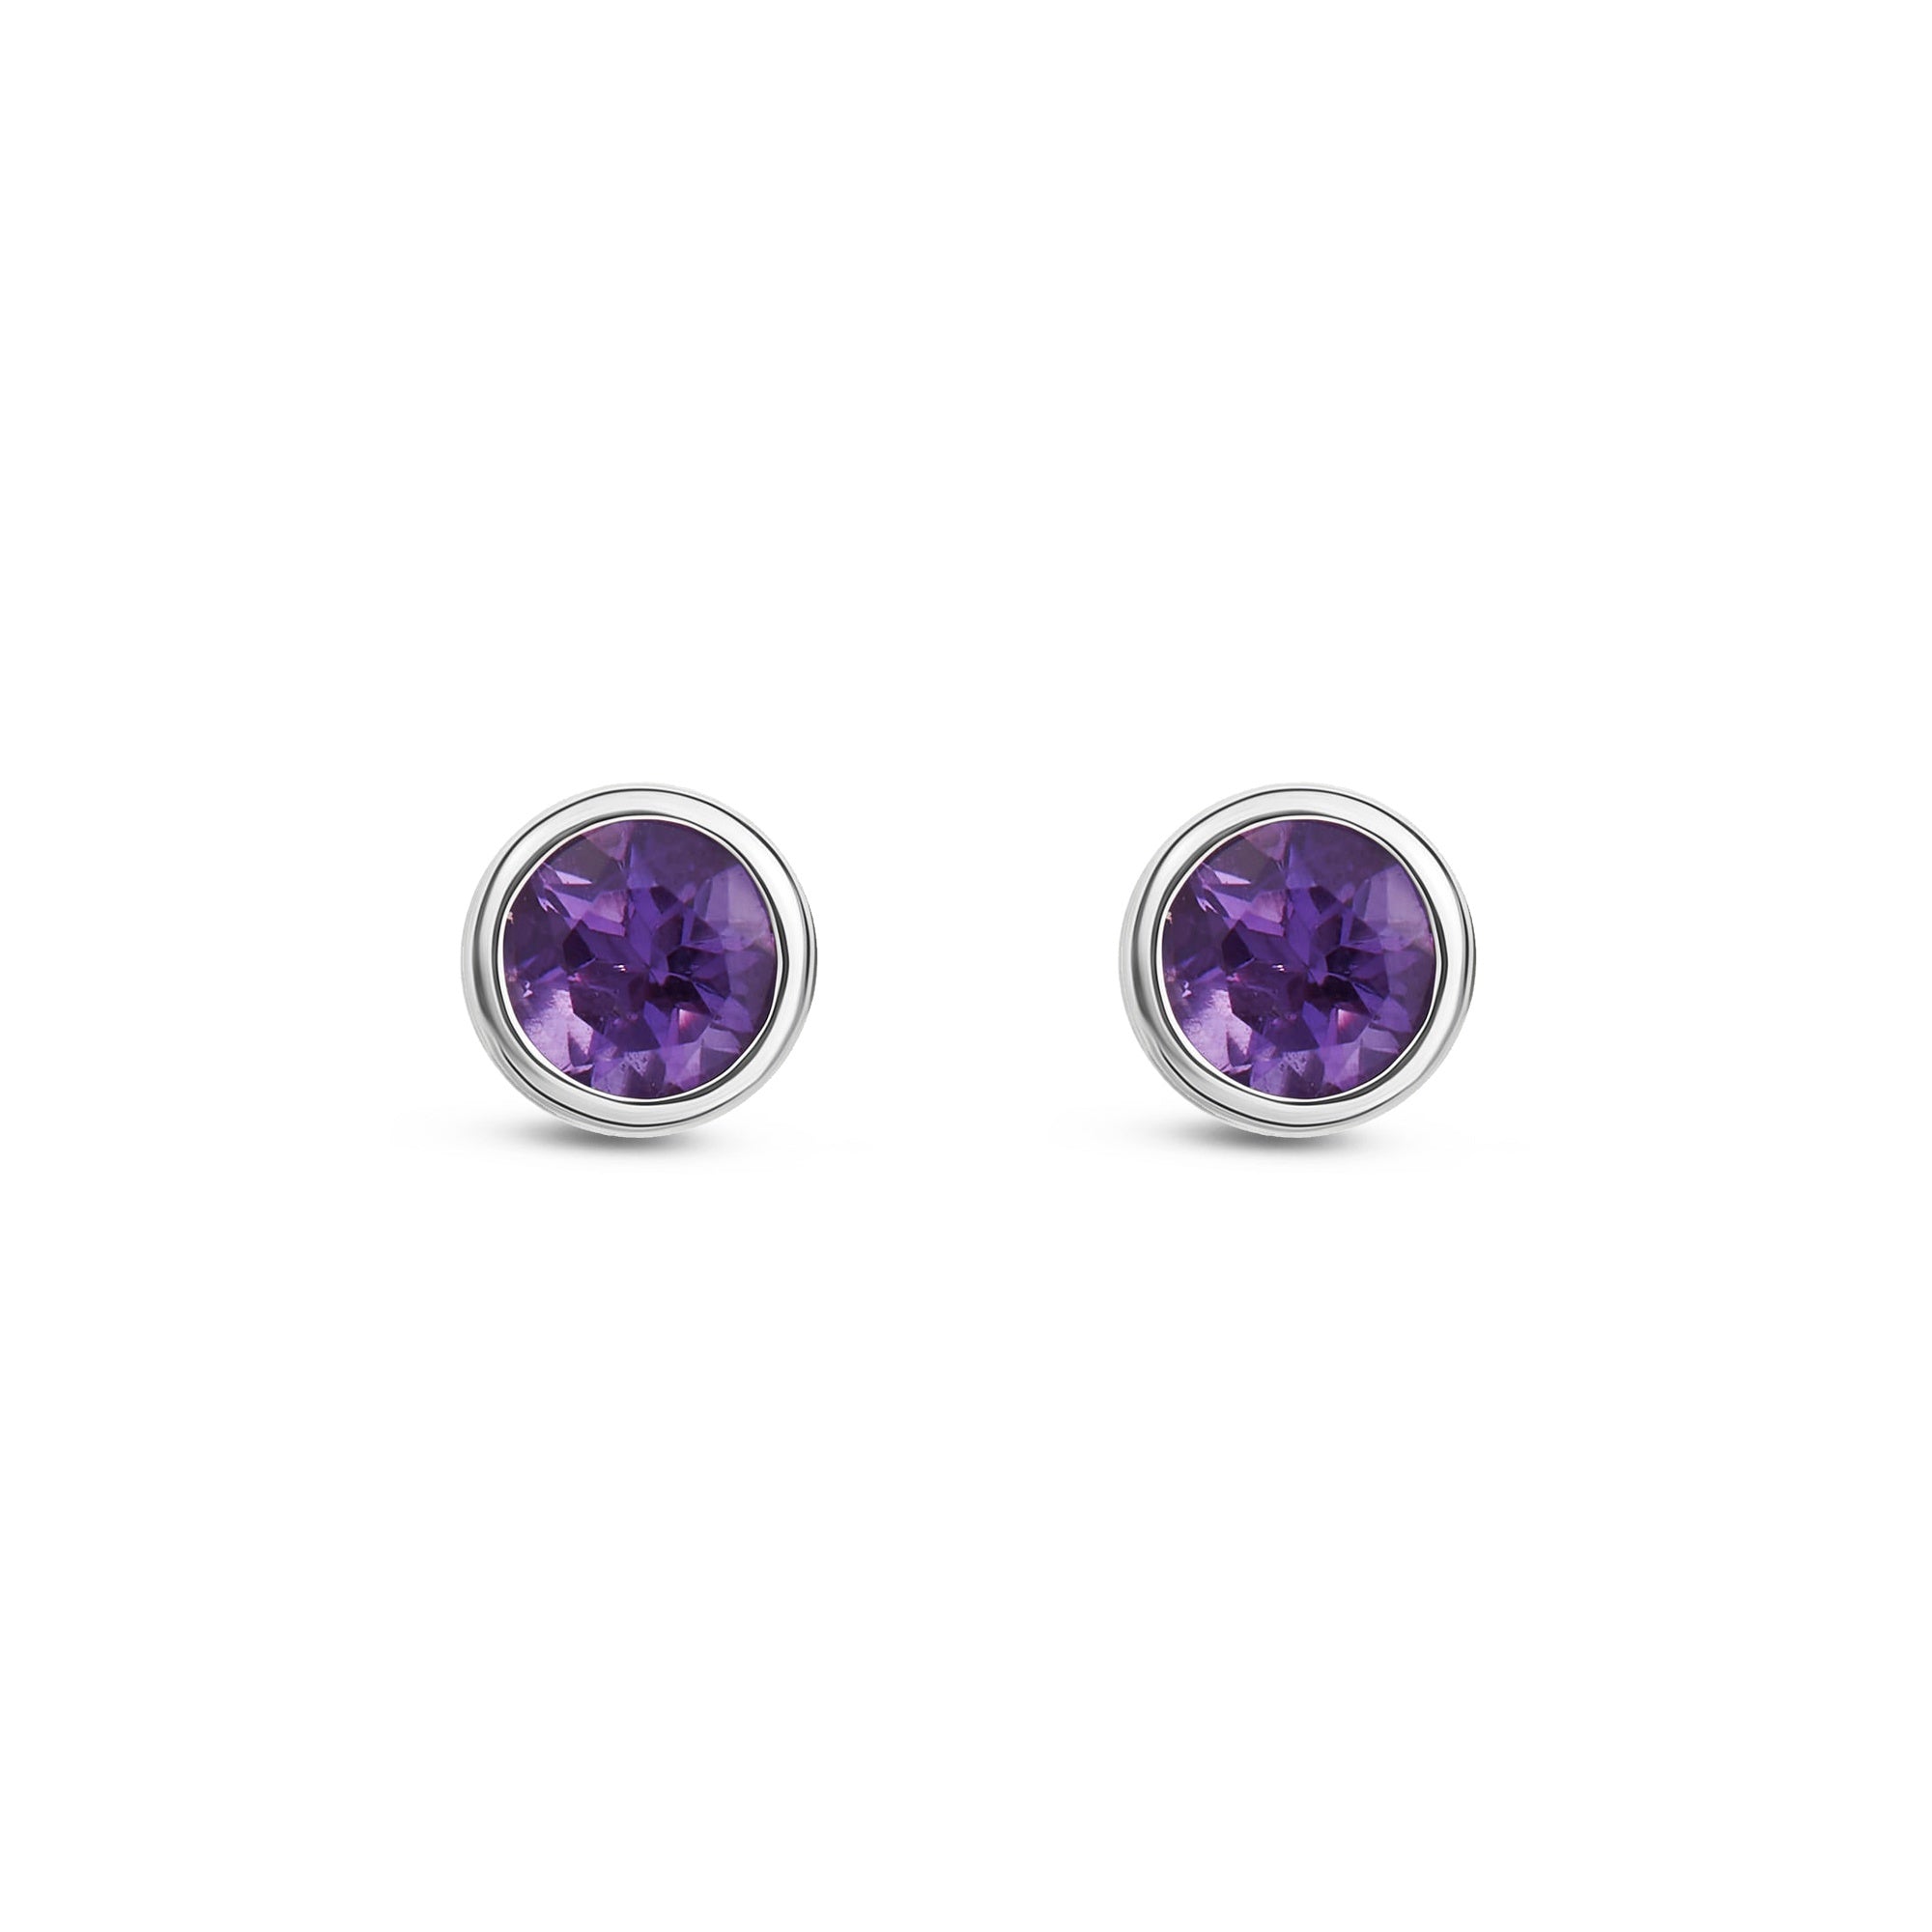 9ct White Gold 3mm Rubover Amethyst Stud Earrings 0.2ct